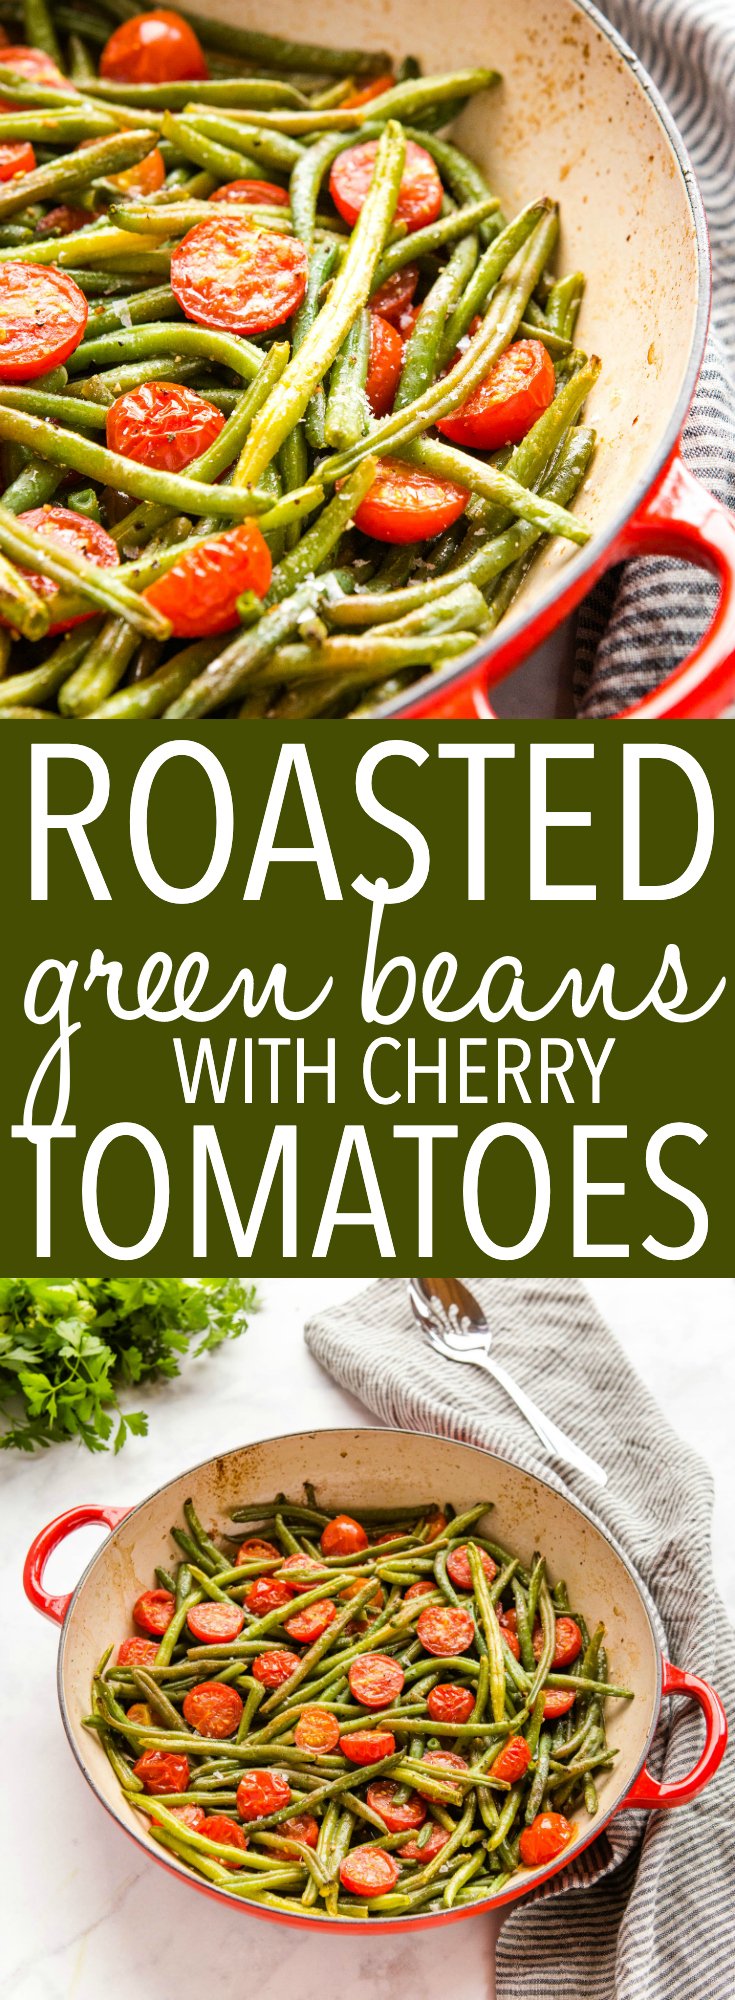 Roasted Green Beans with Cherry Tomatoes Pinterest